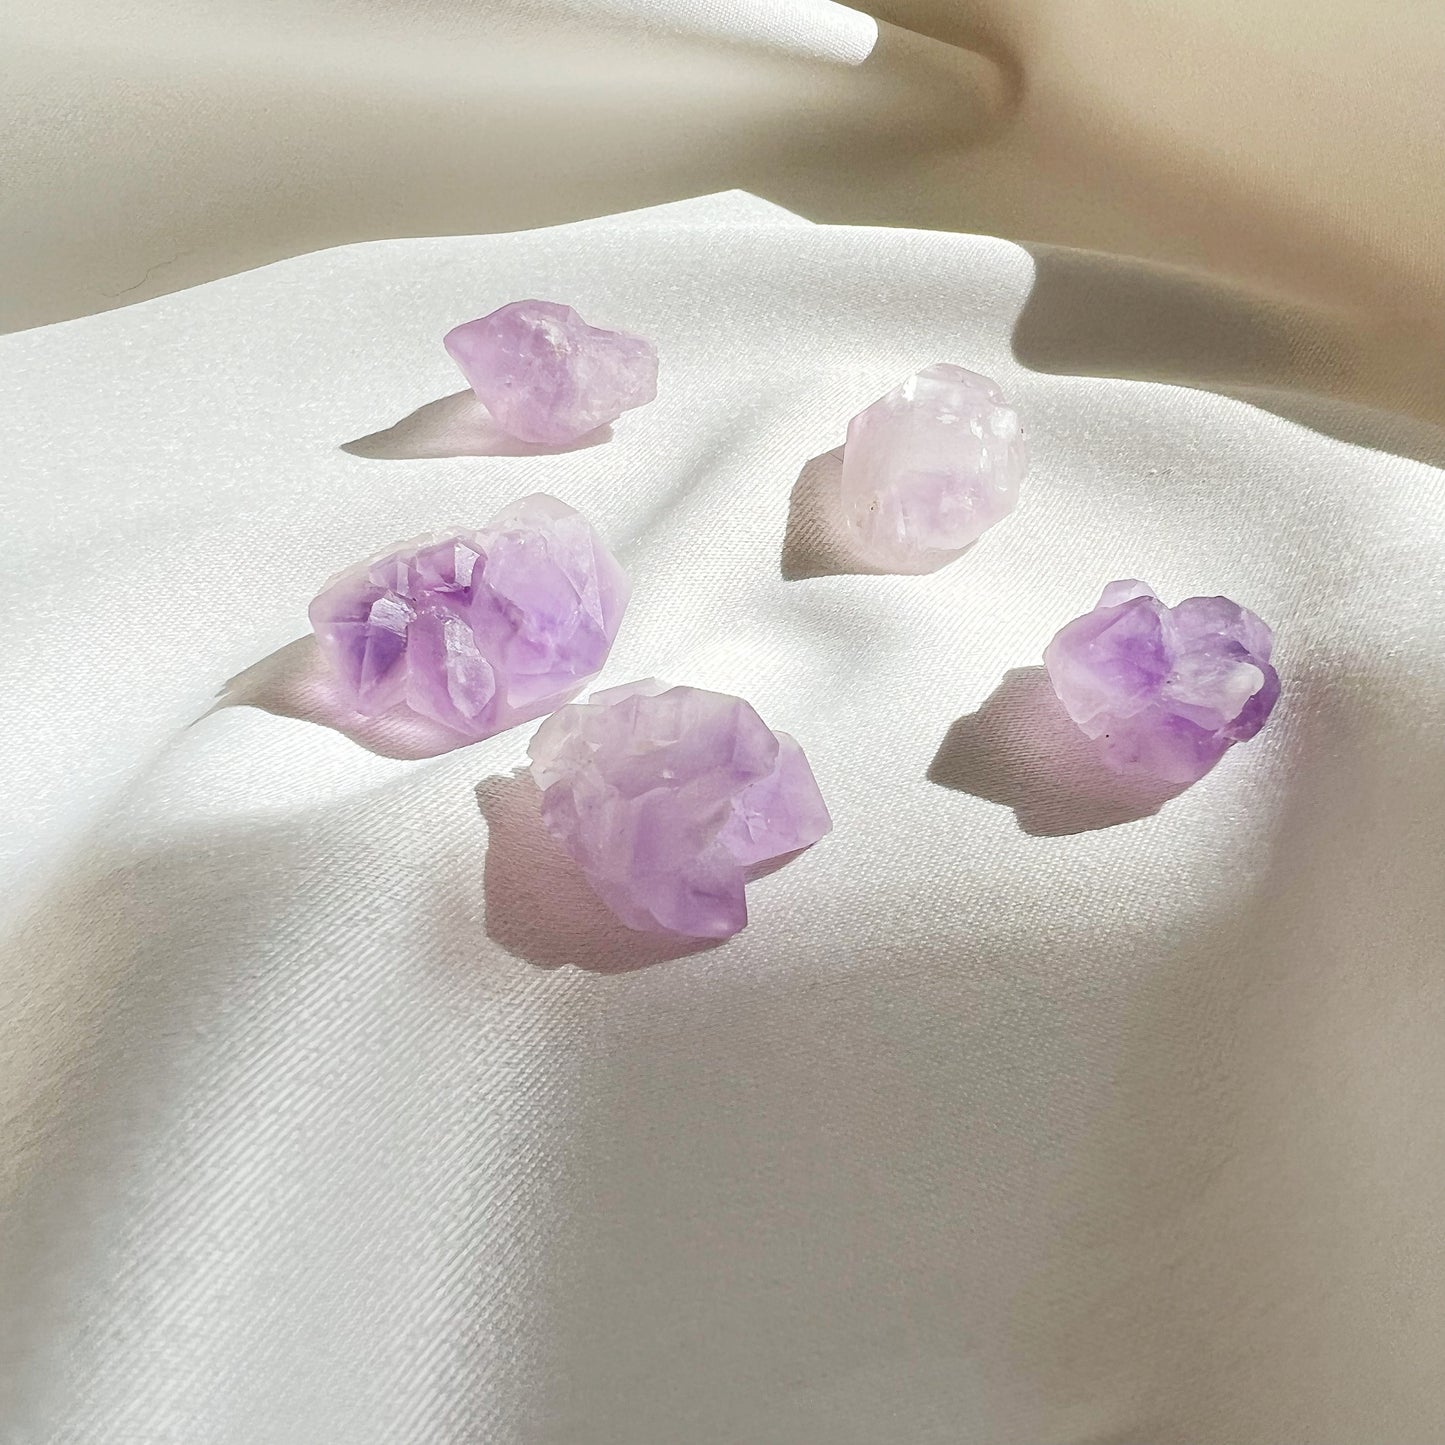 This listing is for five (5) mini Amethyst Flowers. Your 5 amethyst flowers will be intuitively chosen just for you.  Amethyst is a crystal of protection, wisdom, calming energy and aids in stress relief.   Size: approximately 1 inch by .5 inches  *Each Amethyst flower is unique, and the photos are a representation of what you will receive. I will intuitively select your Amethyst flower just for you.  